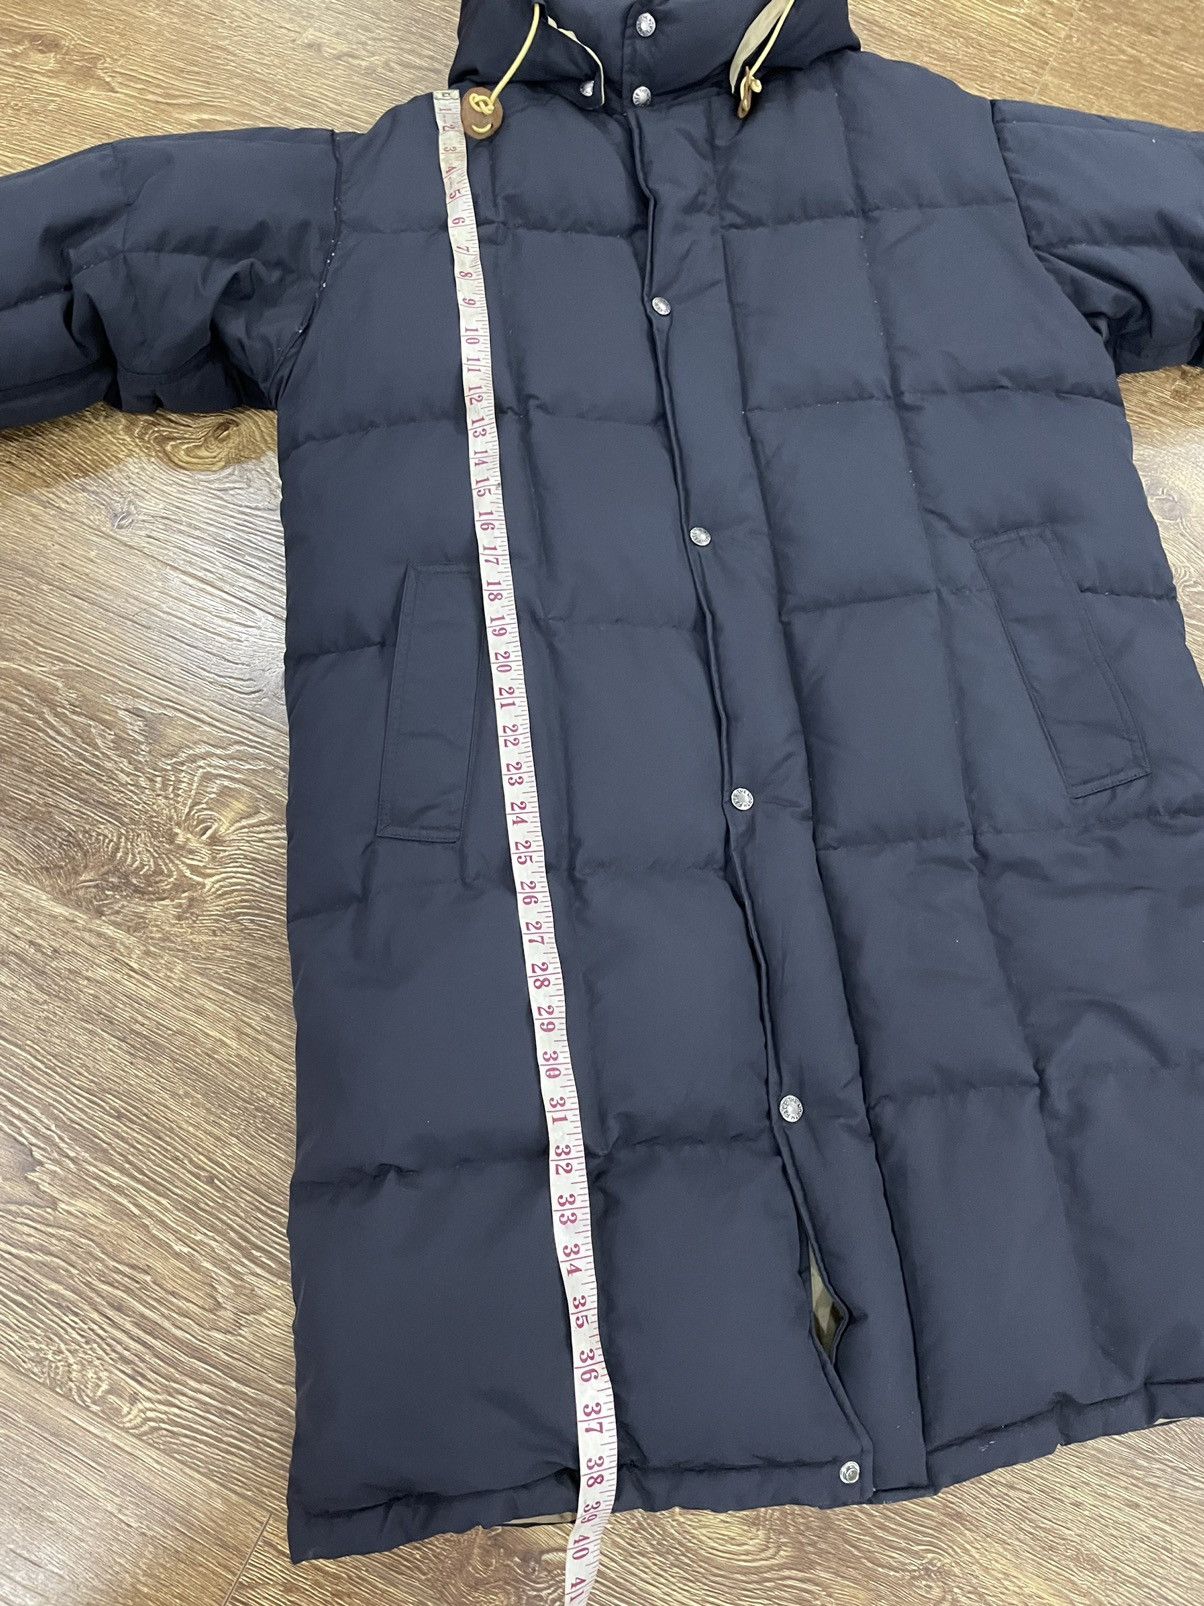 Authentic THE NORTH FACE LONG Long Puffer - 7